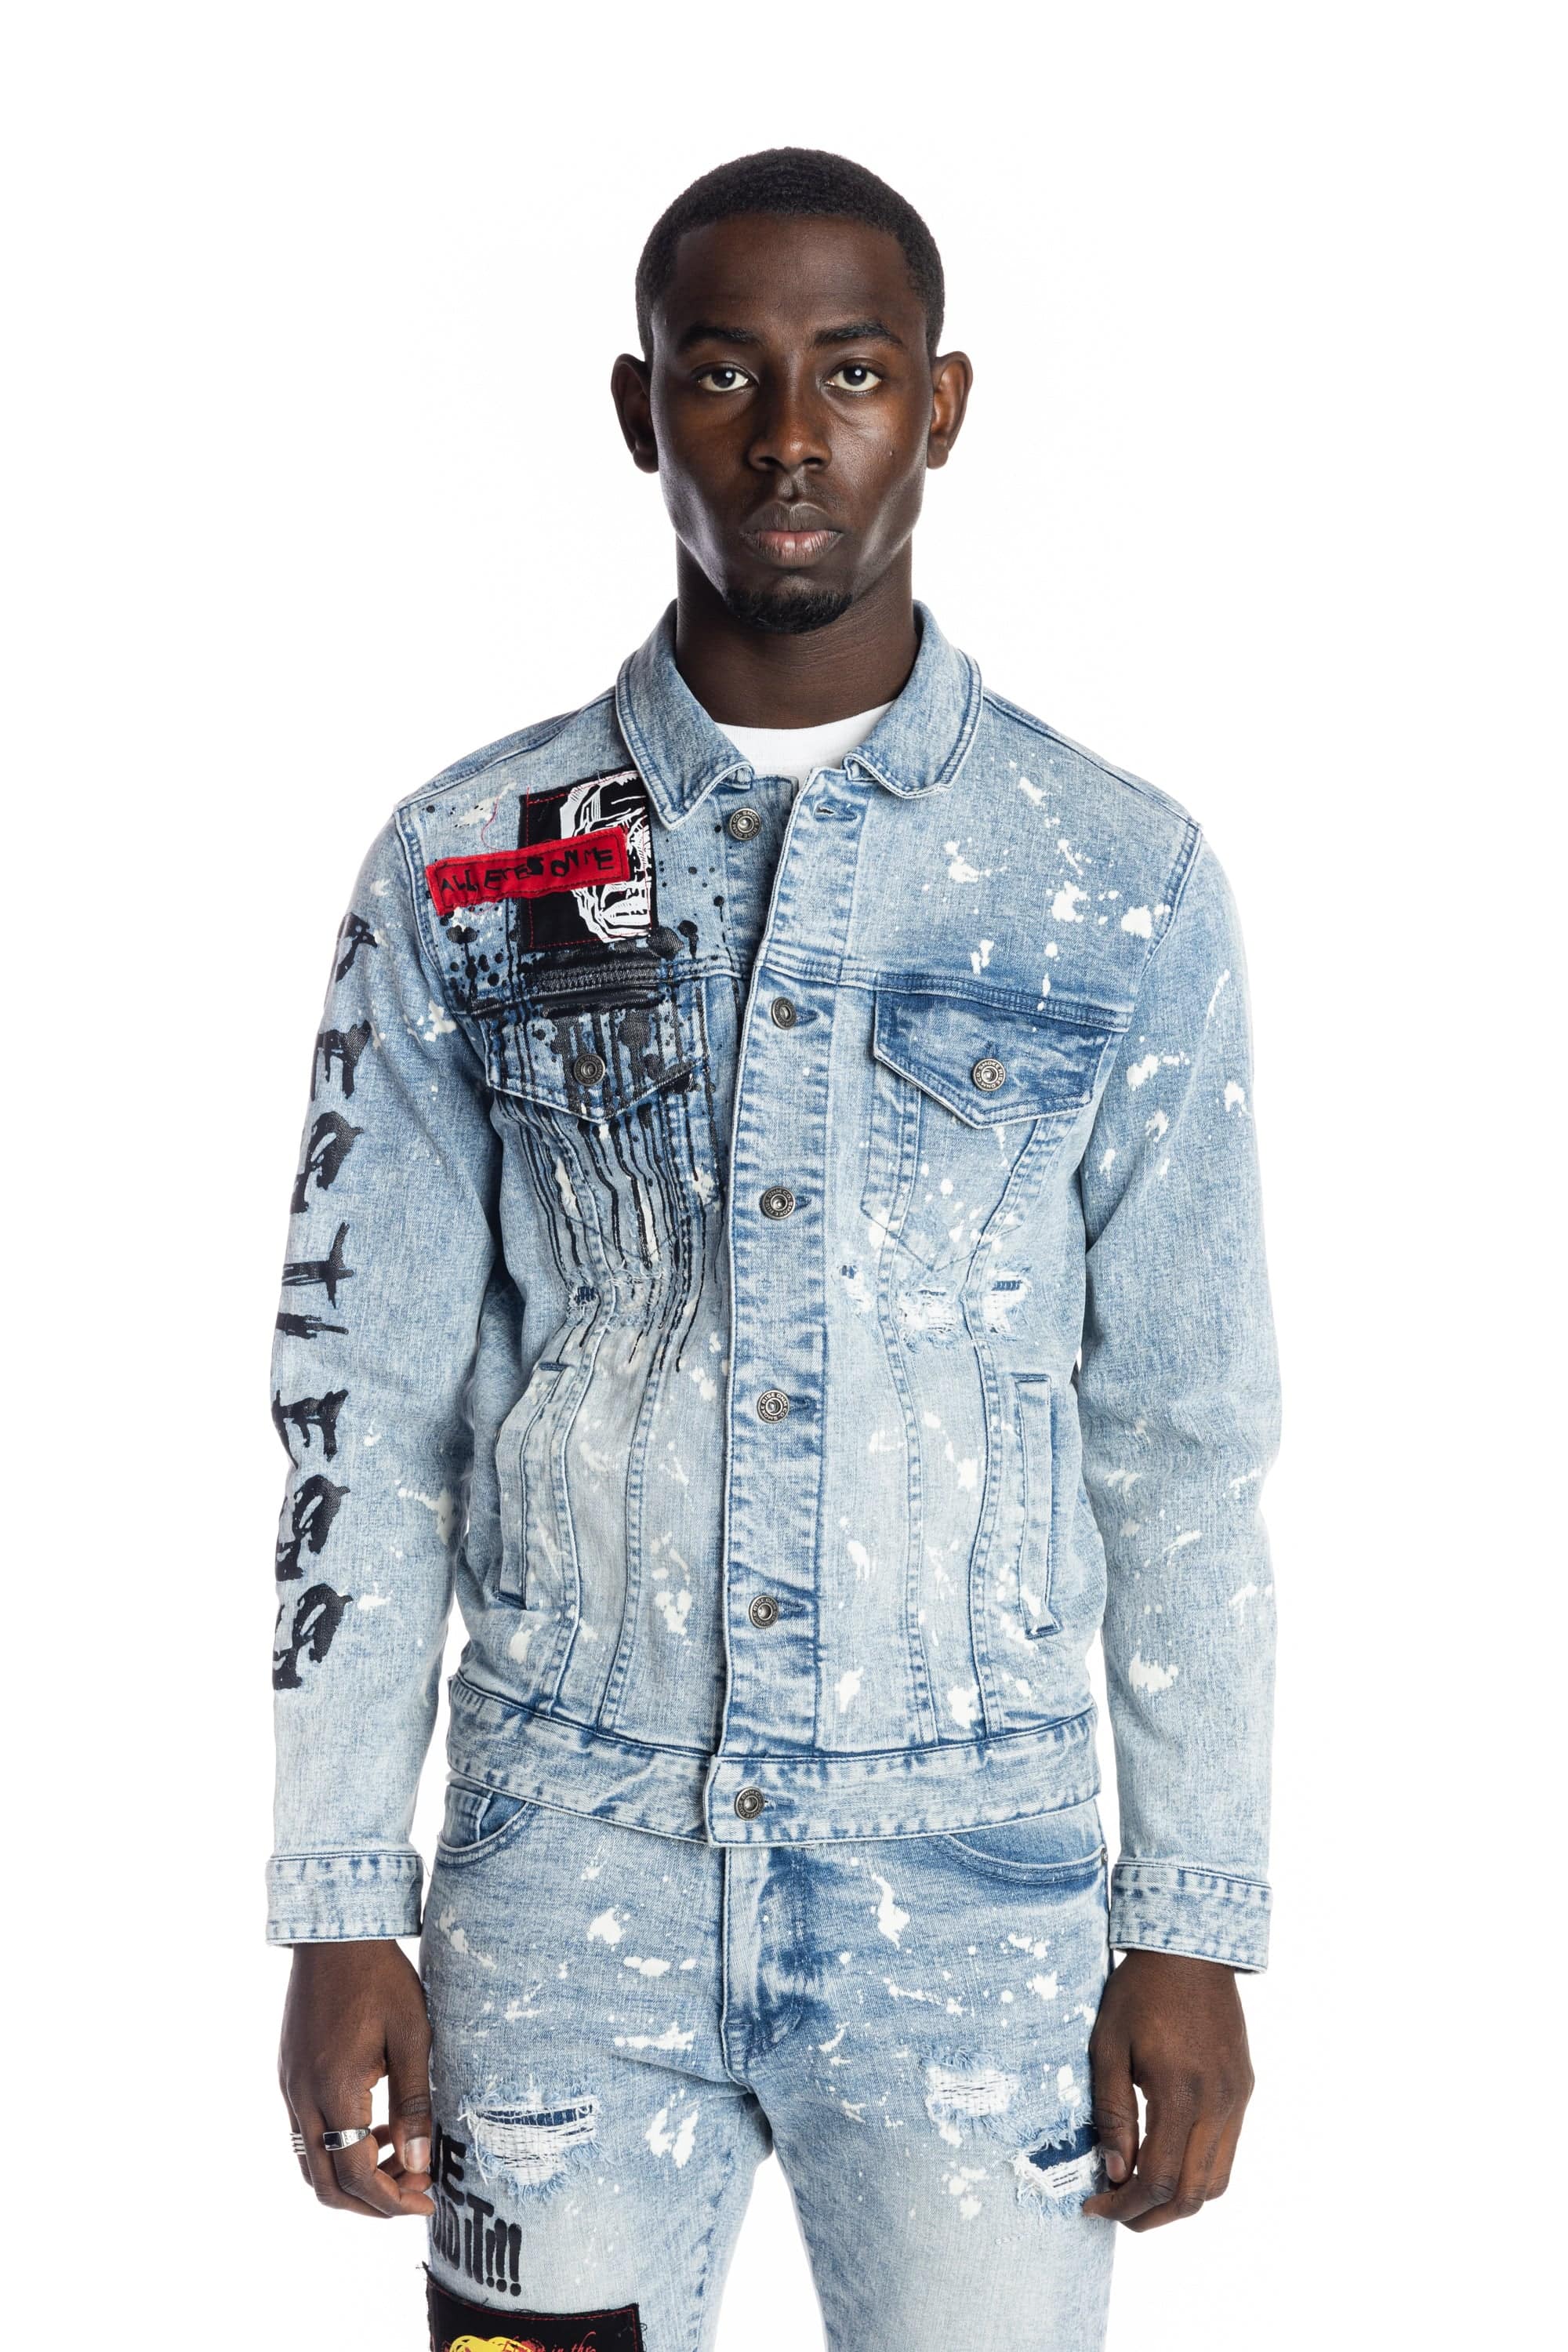 West Louis™ Ripped Ribbon Distressed Denim Jacket  Denim jacket,  Distressed denim jacket, Denim jacket patches